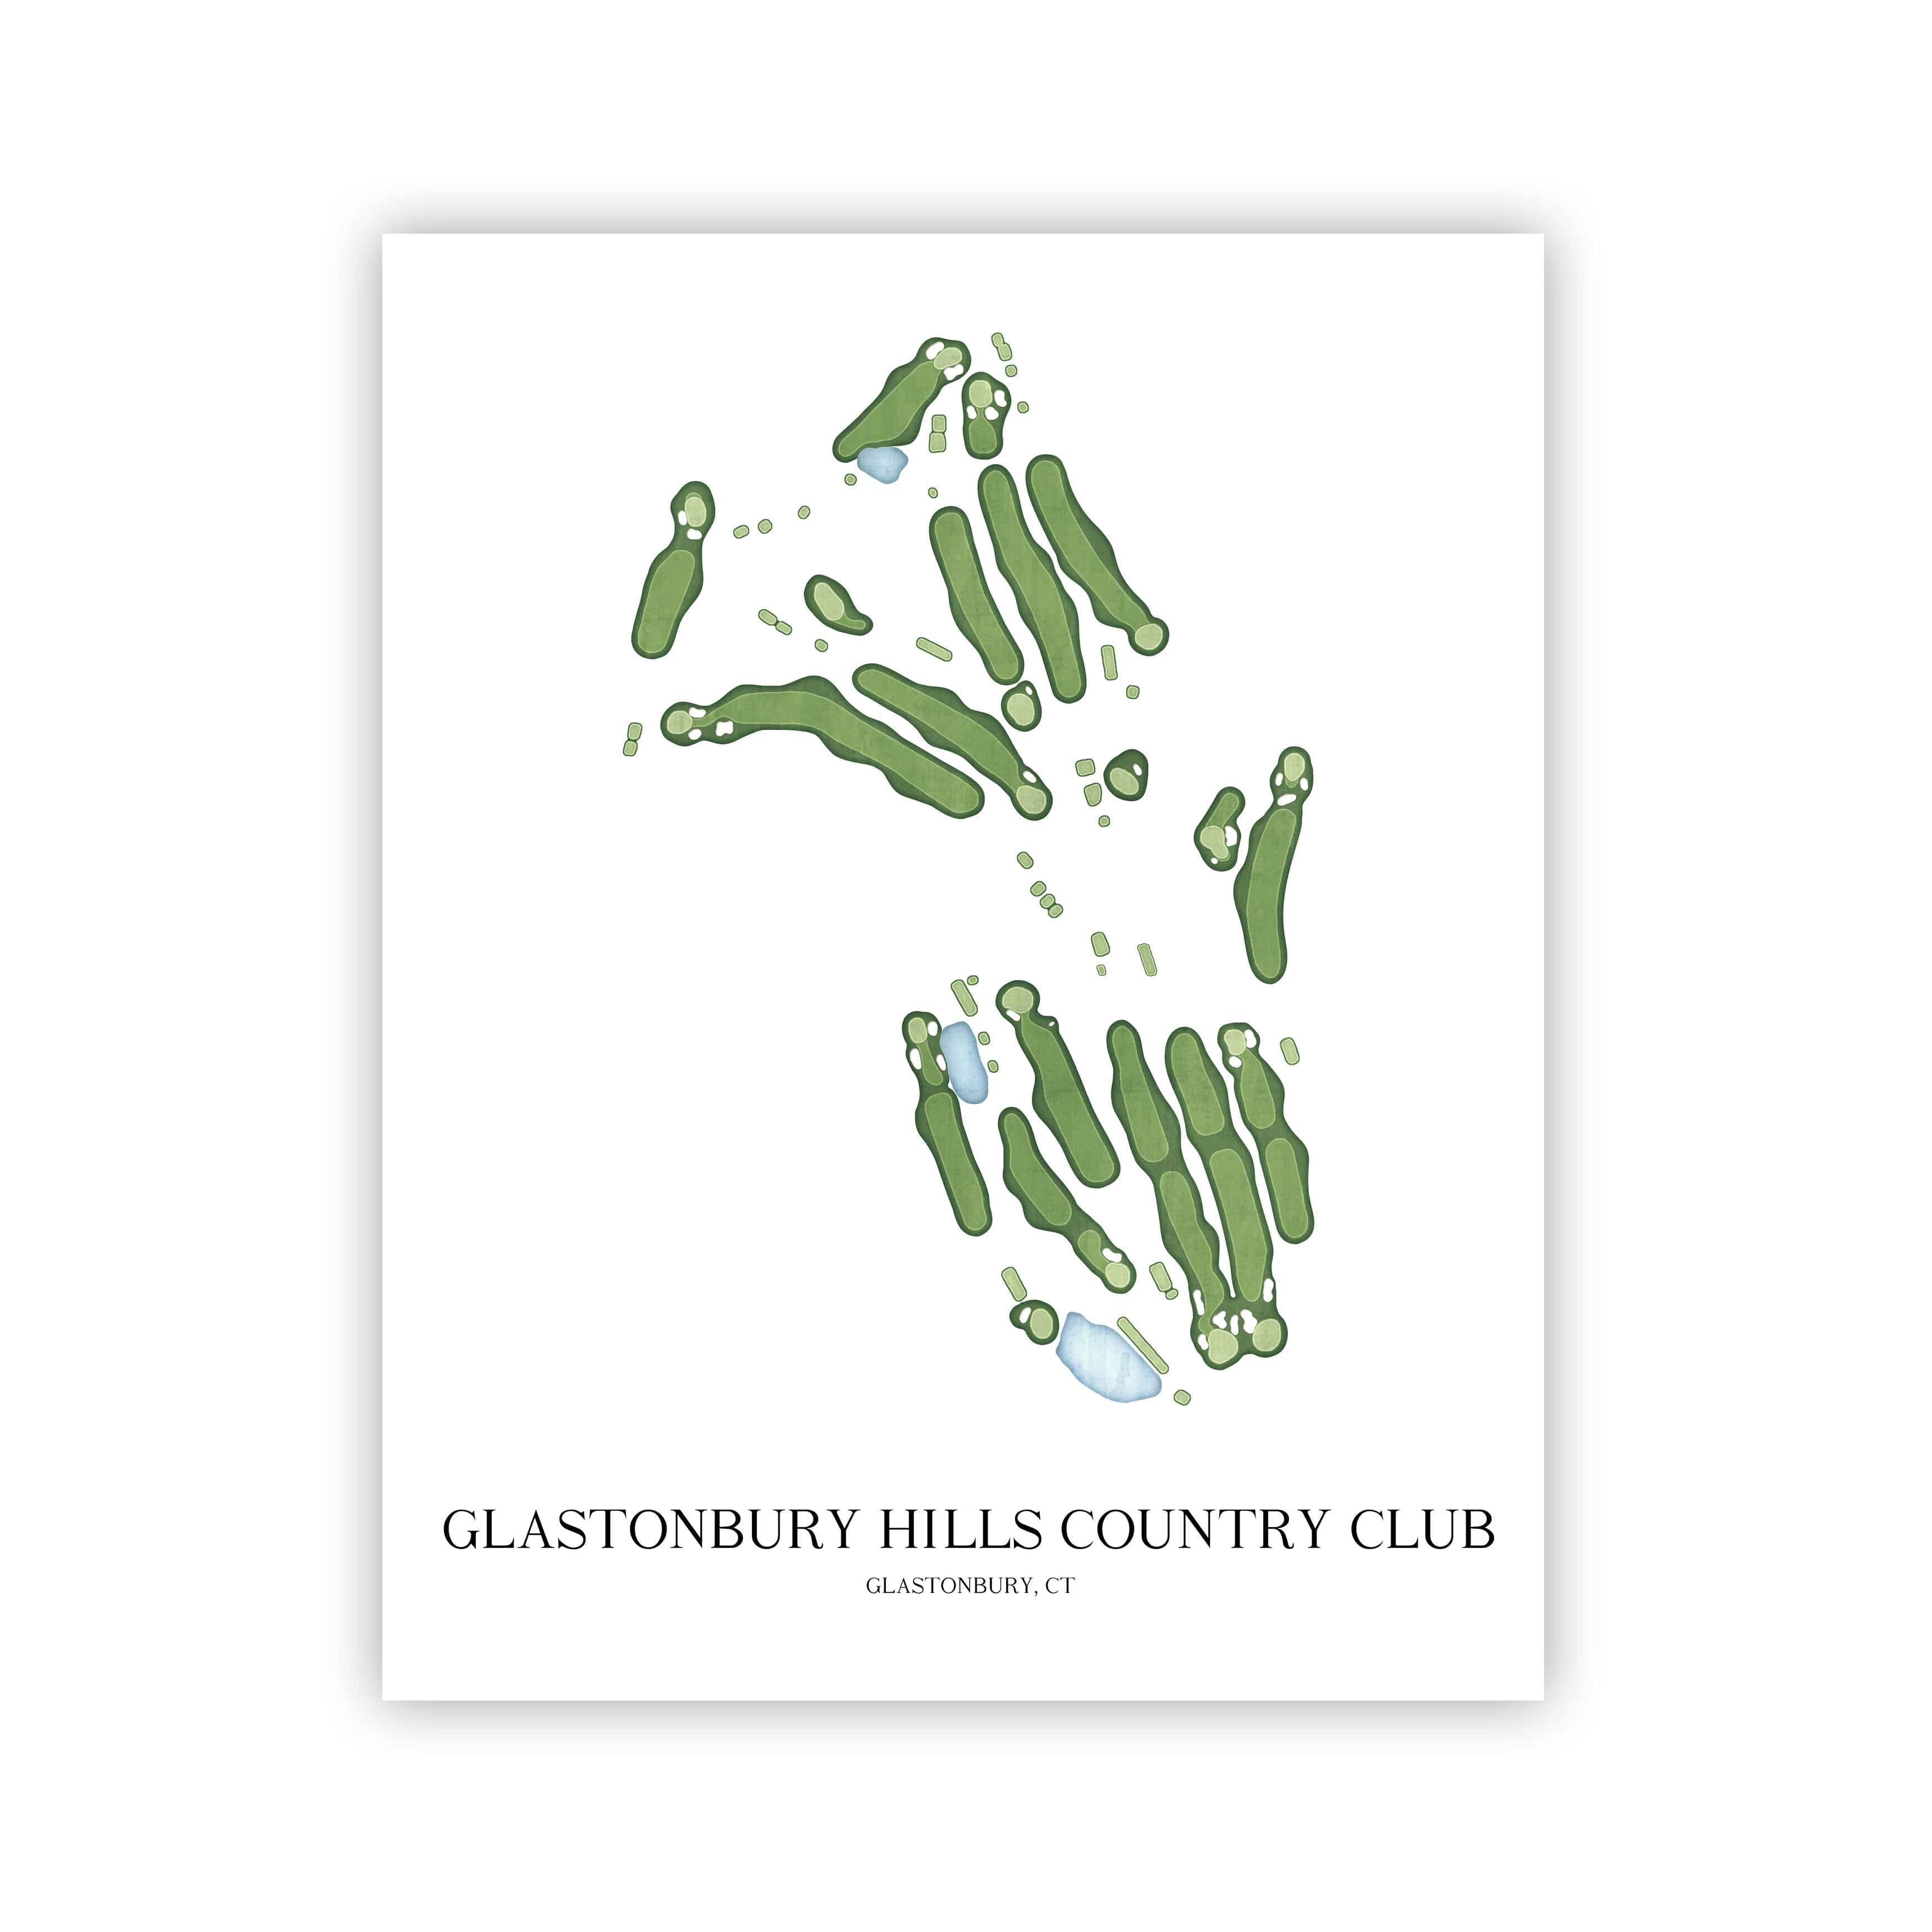 The 19th Hole Golf Shop - Golf Course Prints -  Glastonbury Hills Country Club Golf Course Map